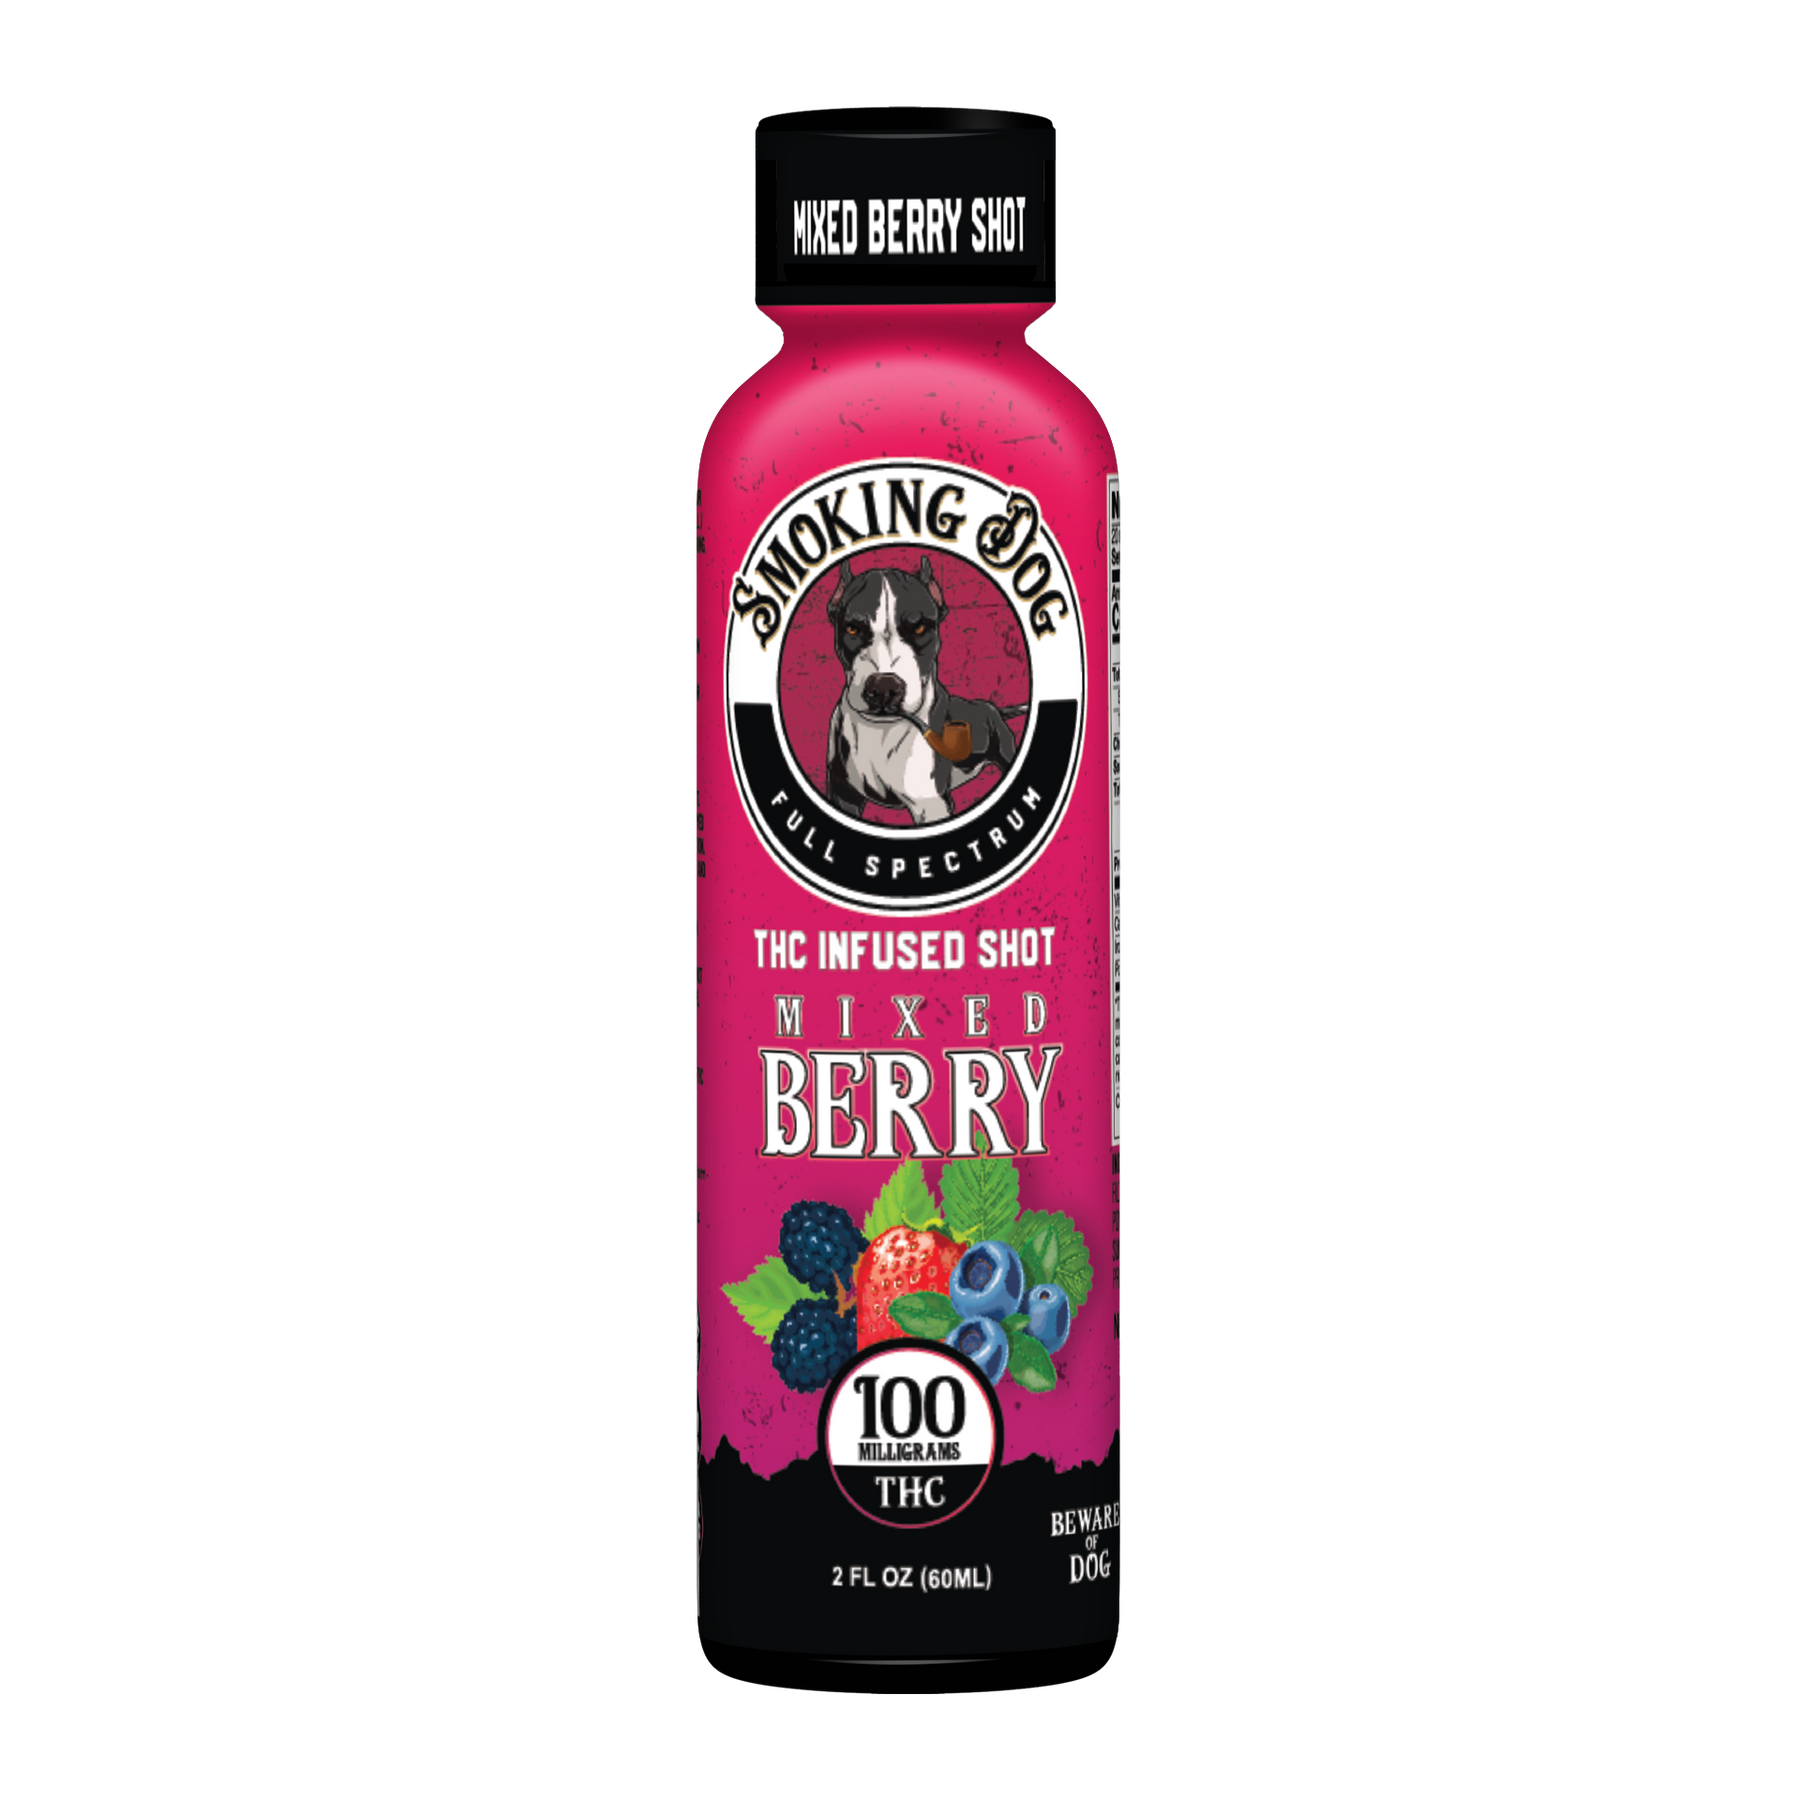 a bottle of mixed berry drink